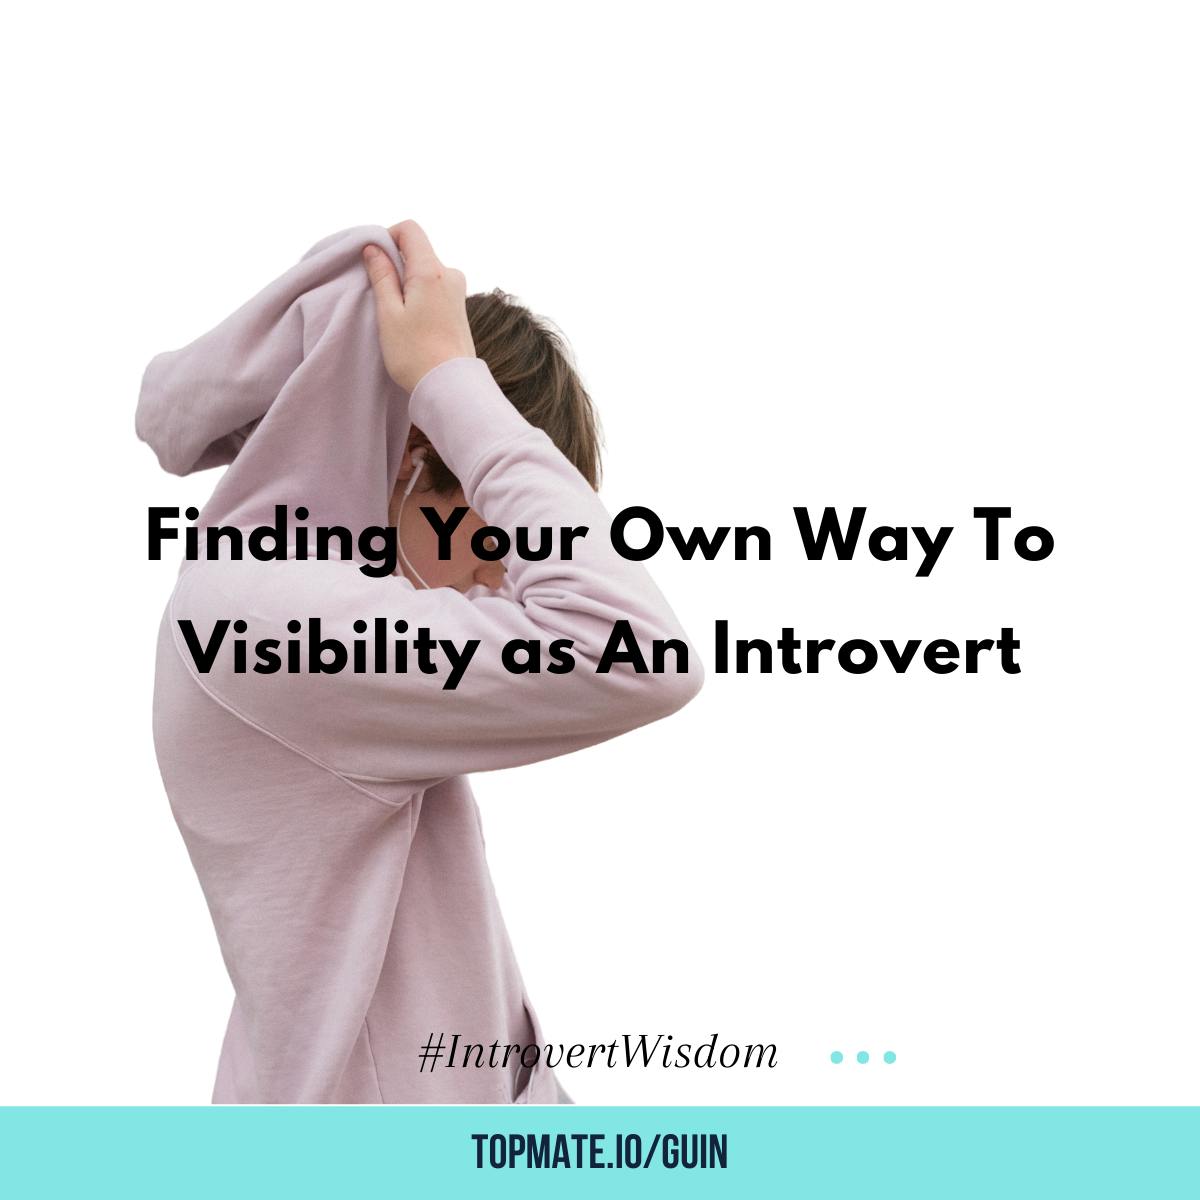 Finding Your Way to Visibility As an Introvert